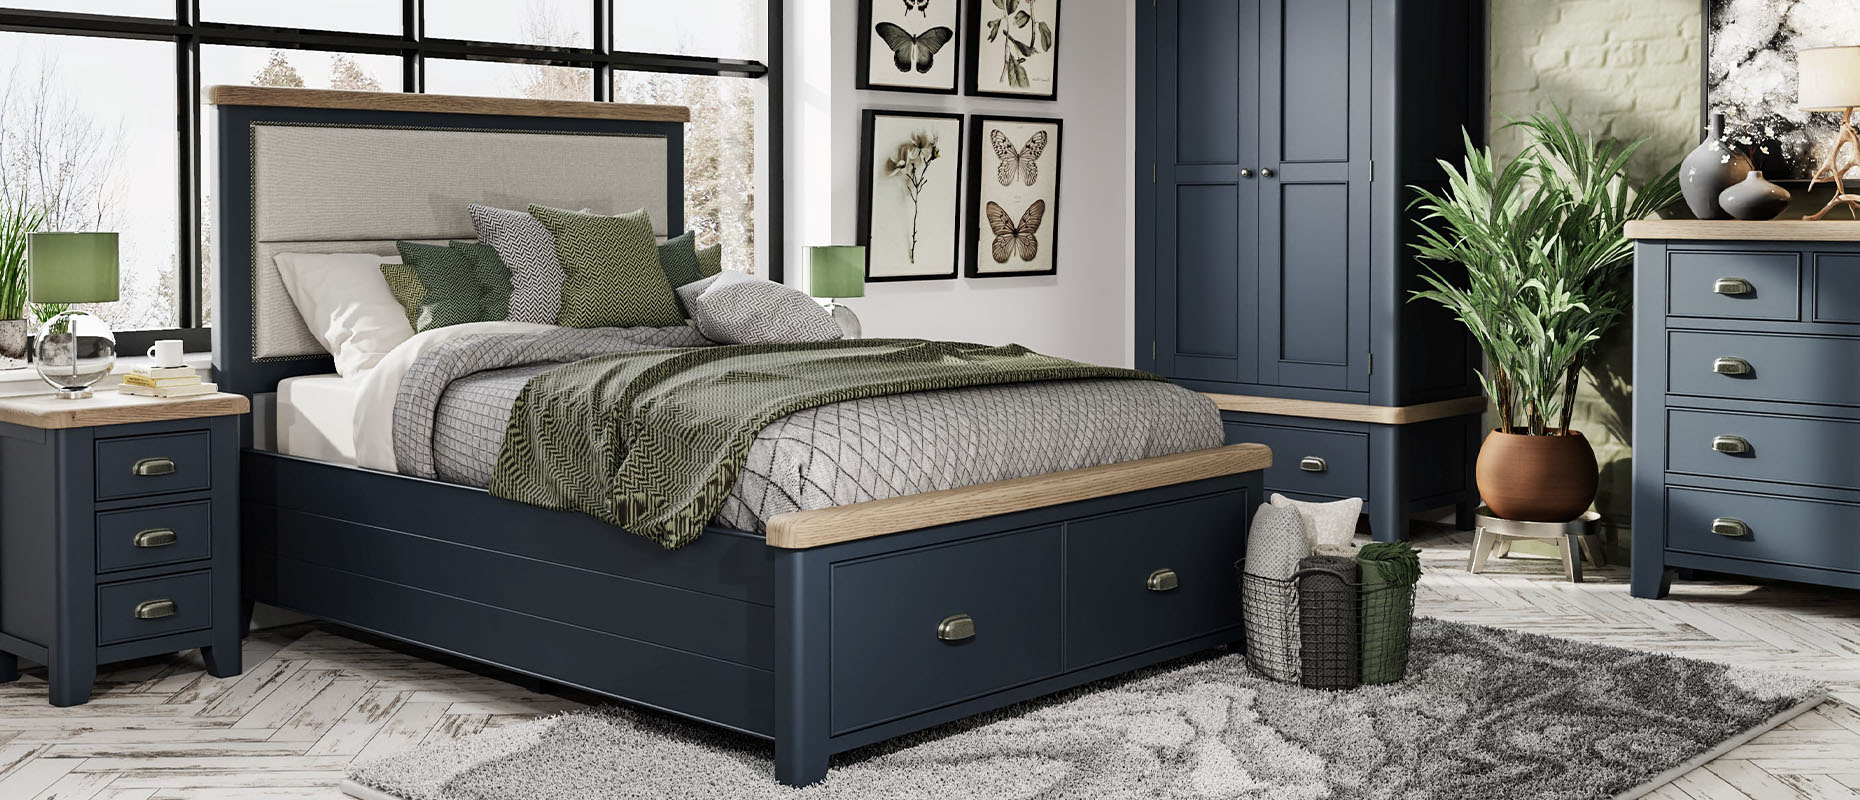 Ryedale Blue bedroom Collection at Forrest Furnishing